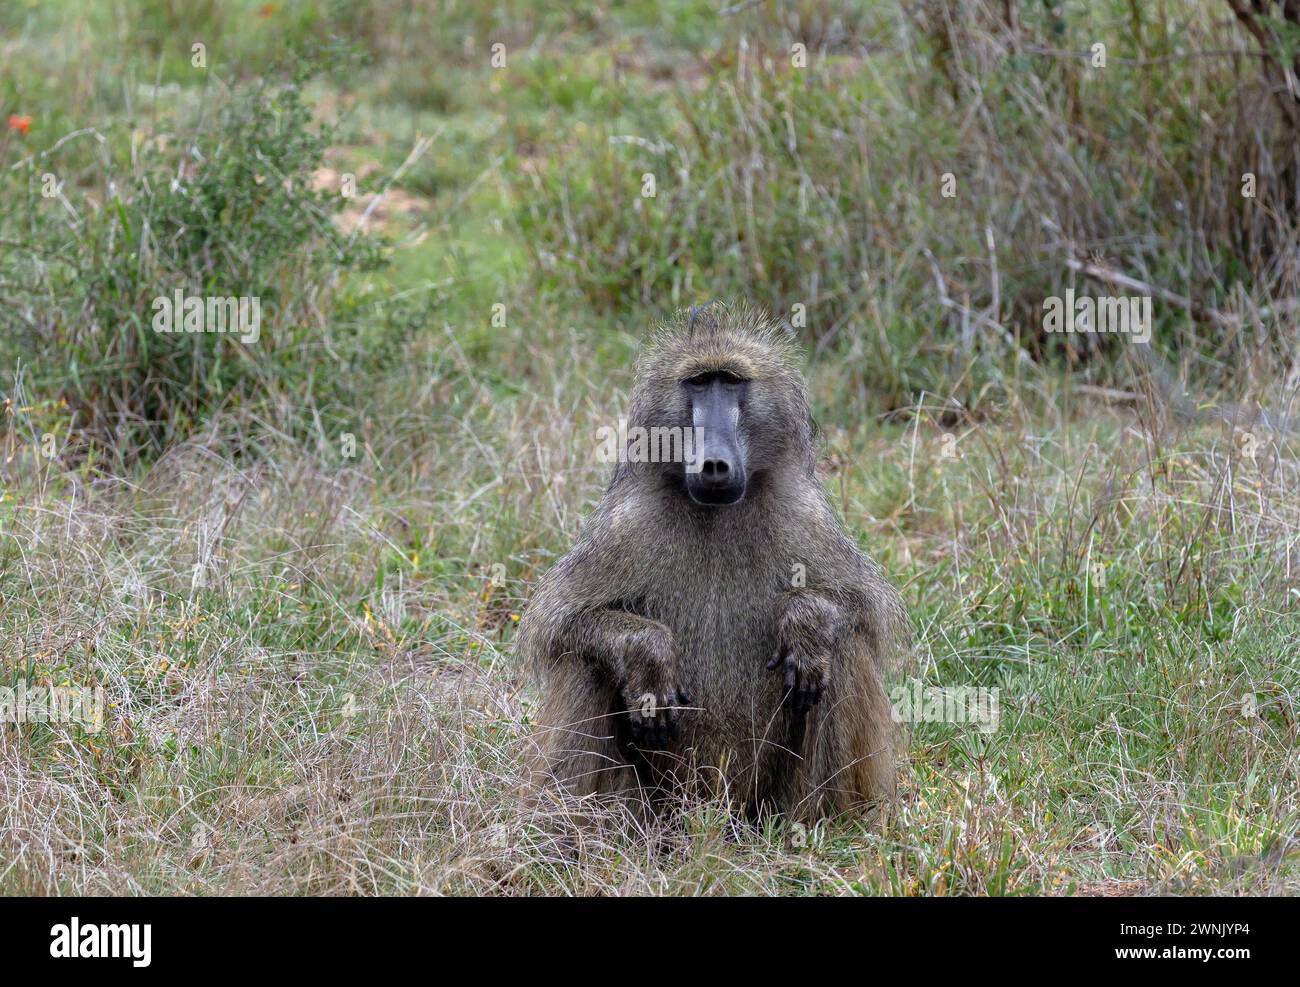 Safari in savannah. Chacma baboon in Kruger National Park, South Africa. One monkey sits in grass and looks at camera. Animals natural habitat, wildli Stock Photo